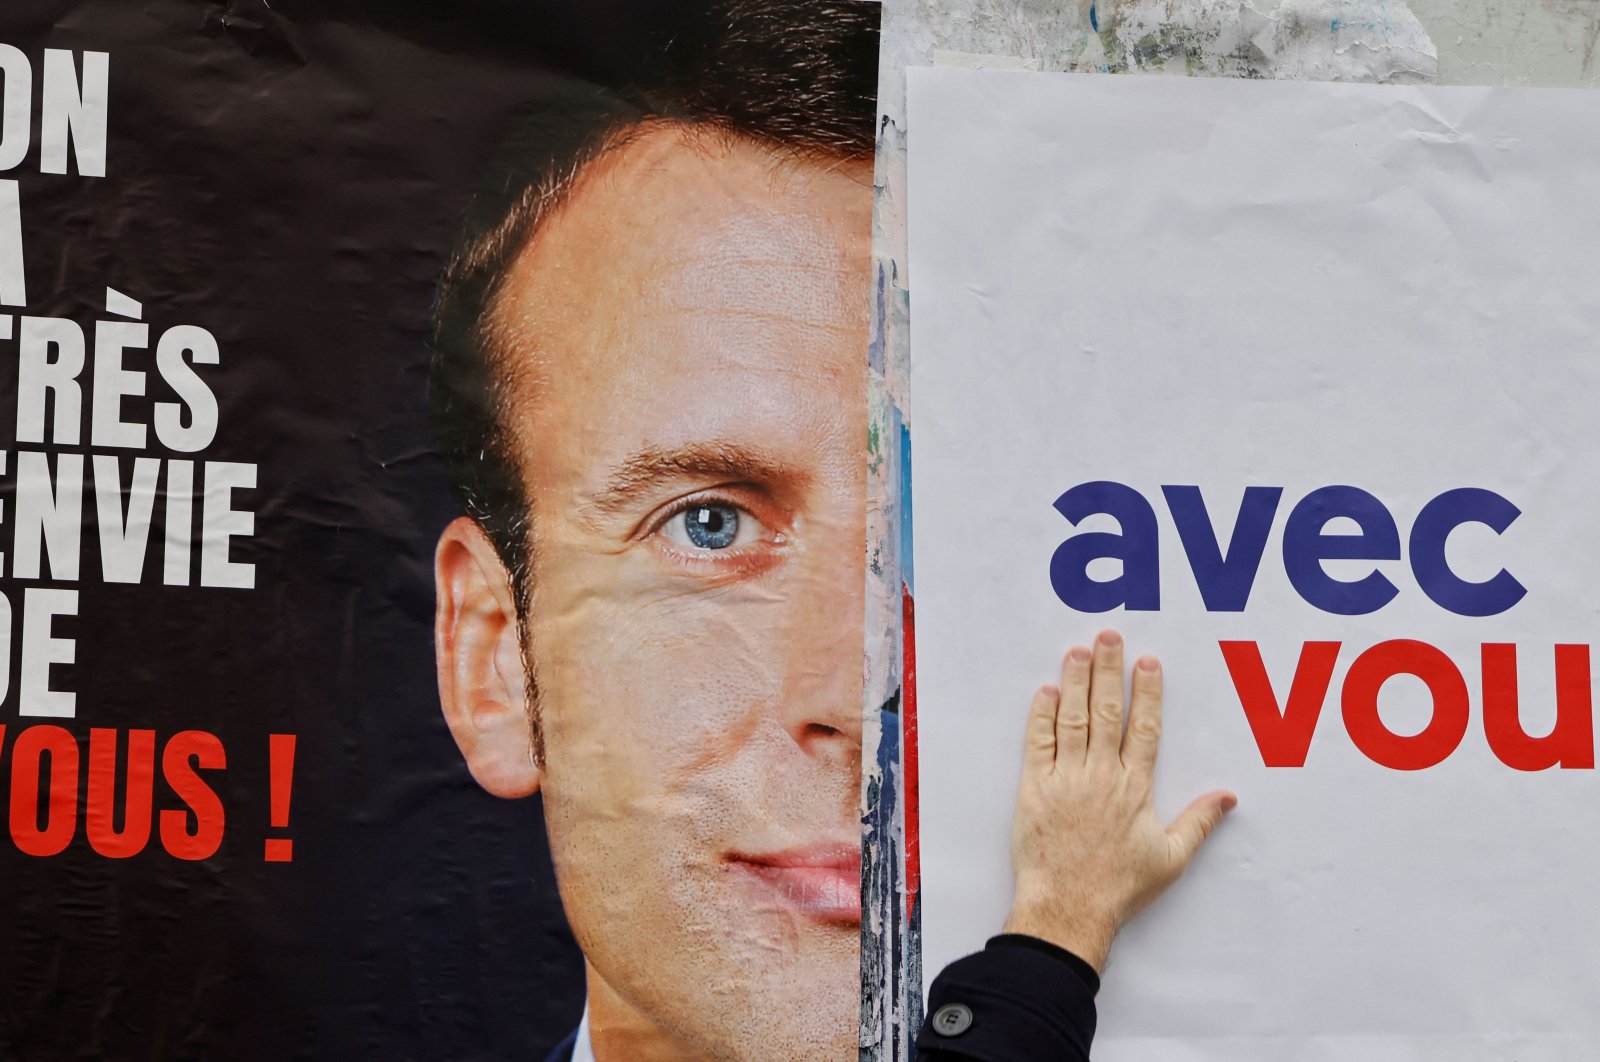 LREM and "Les Jeunes avec Macron" (JAM) supporters stick posters asking for French President Emmanuel Macron&#039;s candidacy to the French presidential election, in Issy-les-Moulineaux, near Paris, on Feb.18, 2022. (AFP Photo)